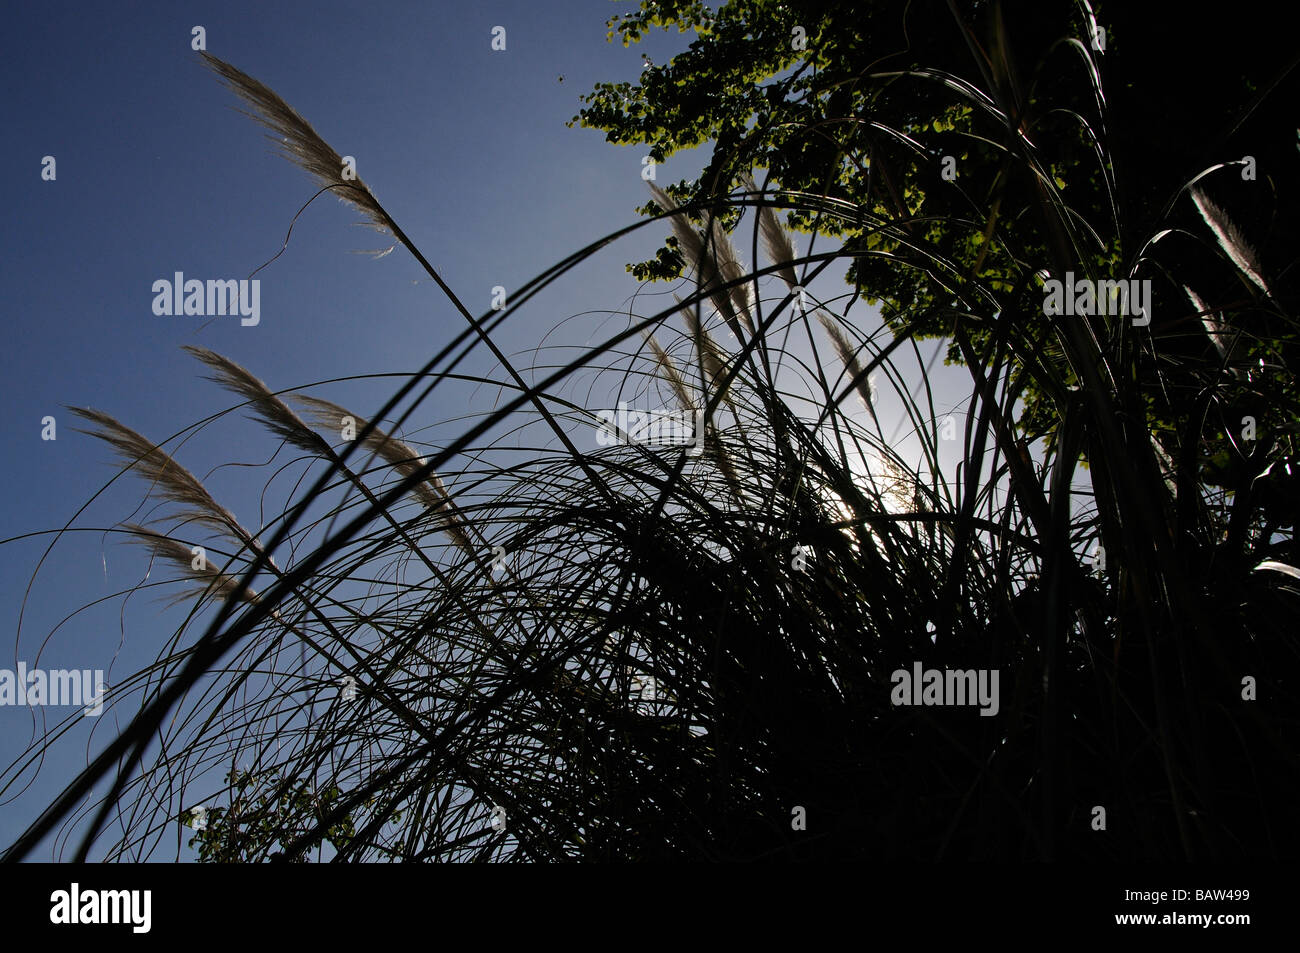 Tall grass in silhouette Stock Photo